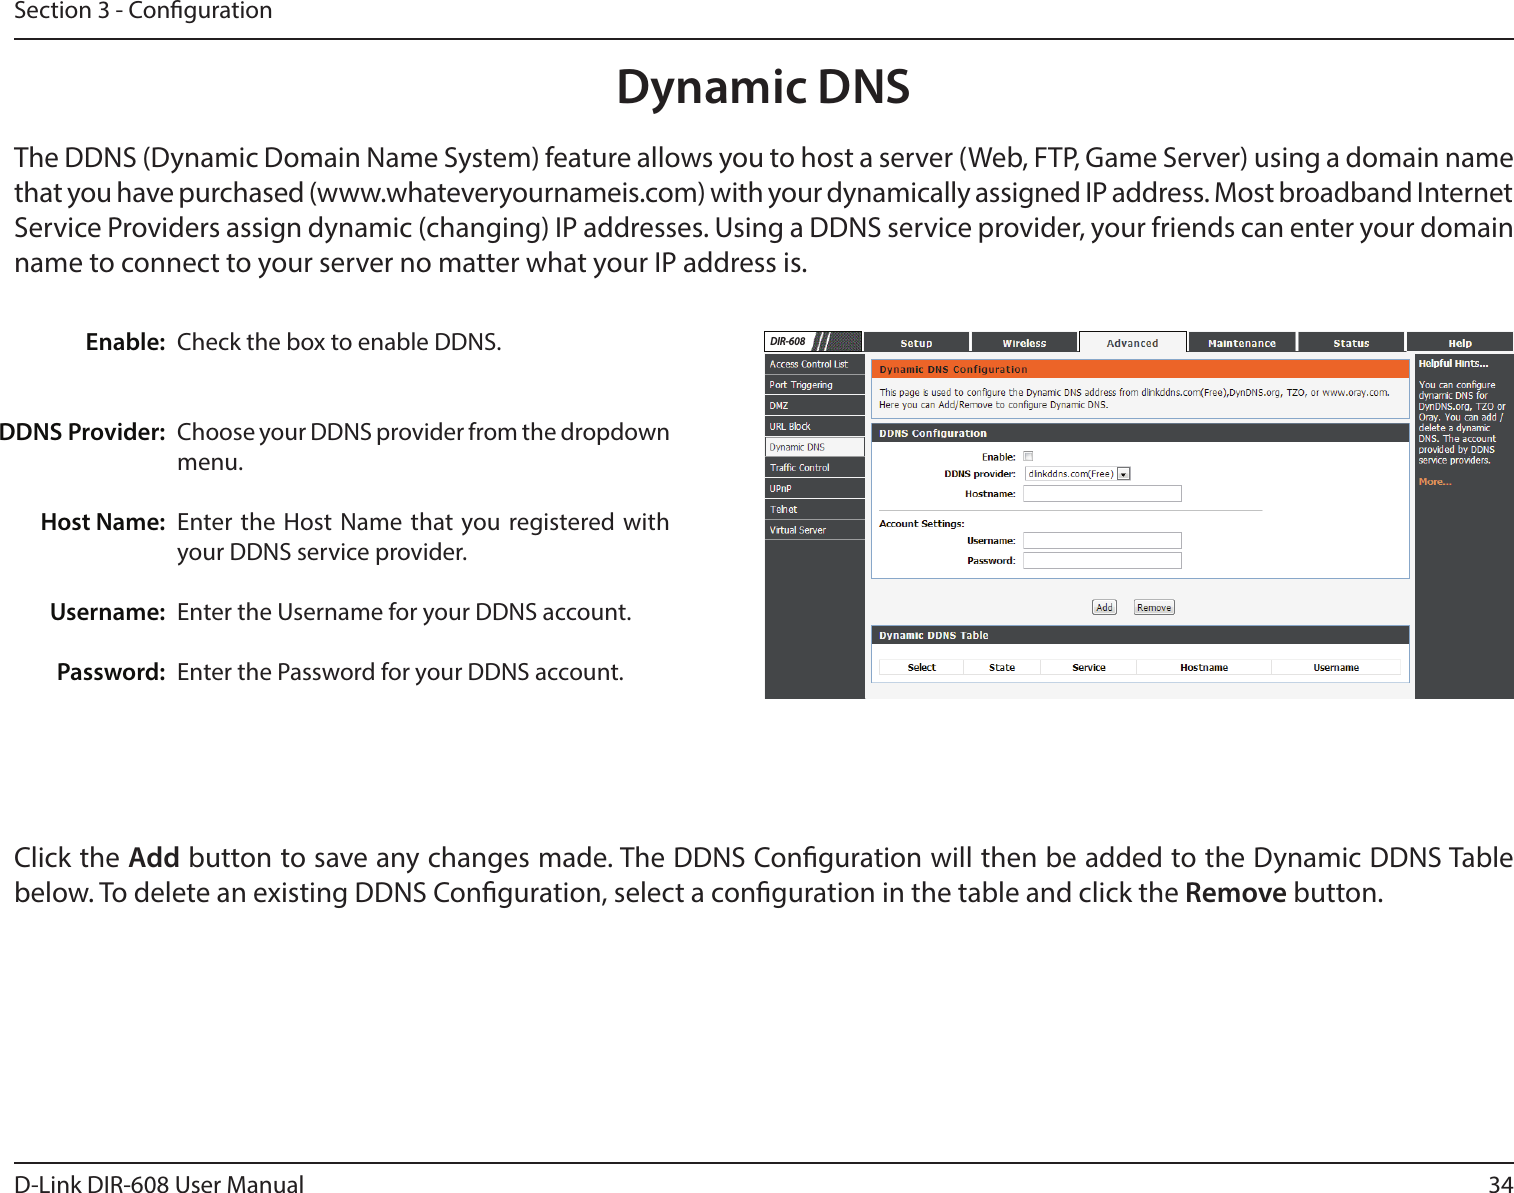 34D-Link DIR-608 User ManualSection 3 - CongurationCheck the box to enable DDNS.Choose your DDNS provider from the dropdown menu.Enter the Host Name that you registered with your DDNS service provider.Enter the Username for your DDNS account.Enter the Password for your DDNS account.Enable:DDNS Provider:Host Name:Username:Password:Dynamic DNSThe DDNS (Dynamic Domain Name System) feature allows you to host a server (Web, FTP, Game Server) using a domain name that you have purchased (www.whateveryournameis.com) with your dynamically assigned IP address. Most broadband Internet Service Providers assign dynamic (changing) IP addresses. Using a DDNS service provider, your friends can enter your domain name to connect to your server no matter what your IP address is.Click the Add button to save any changes made. The DDNS Conguration will then be added to the Dynamic DDNS Table below. To delete an existing DDNS Conguration, select a conguration in the table and click the Remove button.DIR-608